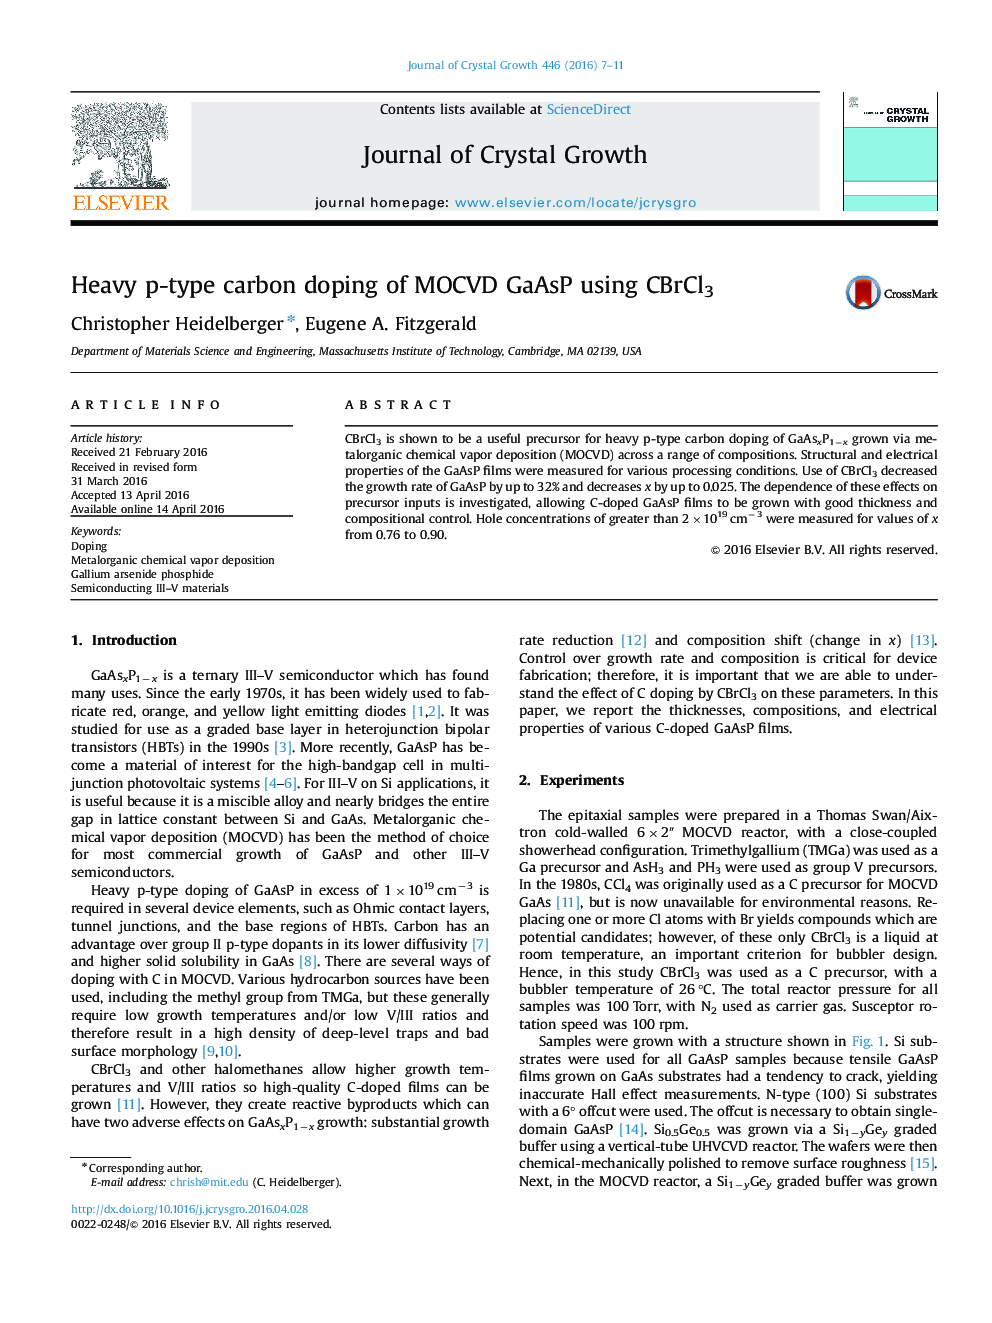 Heavy p-type carbon doping of MOCVD GaAsP using CBrCl3